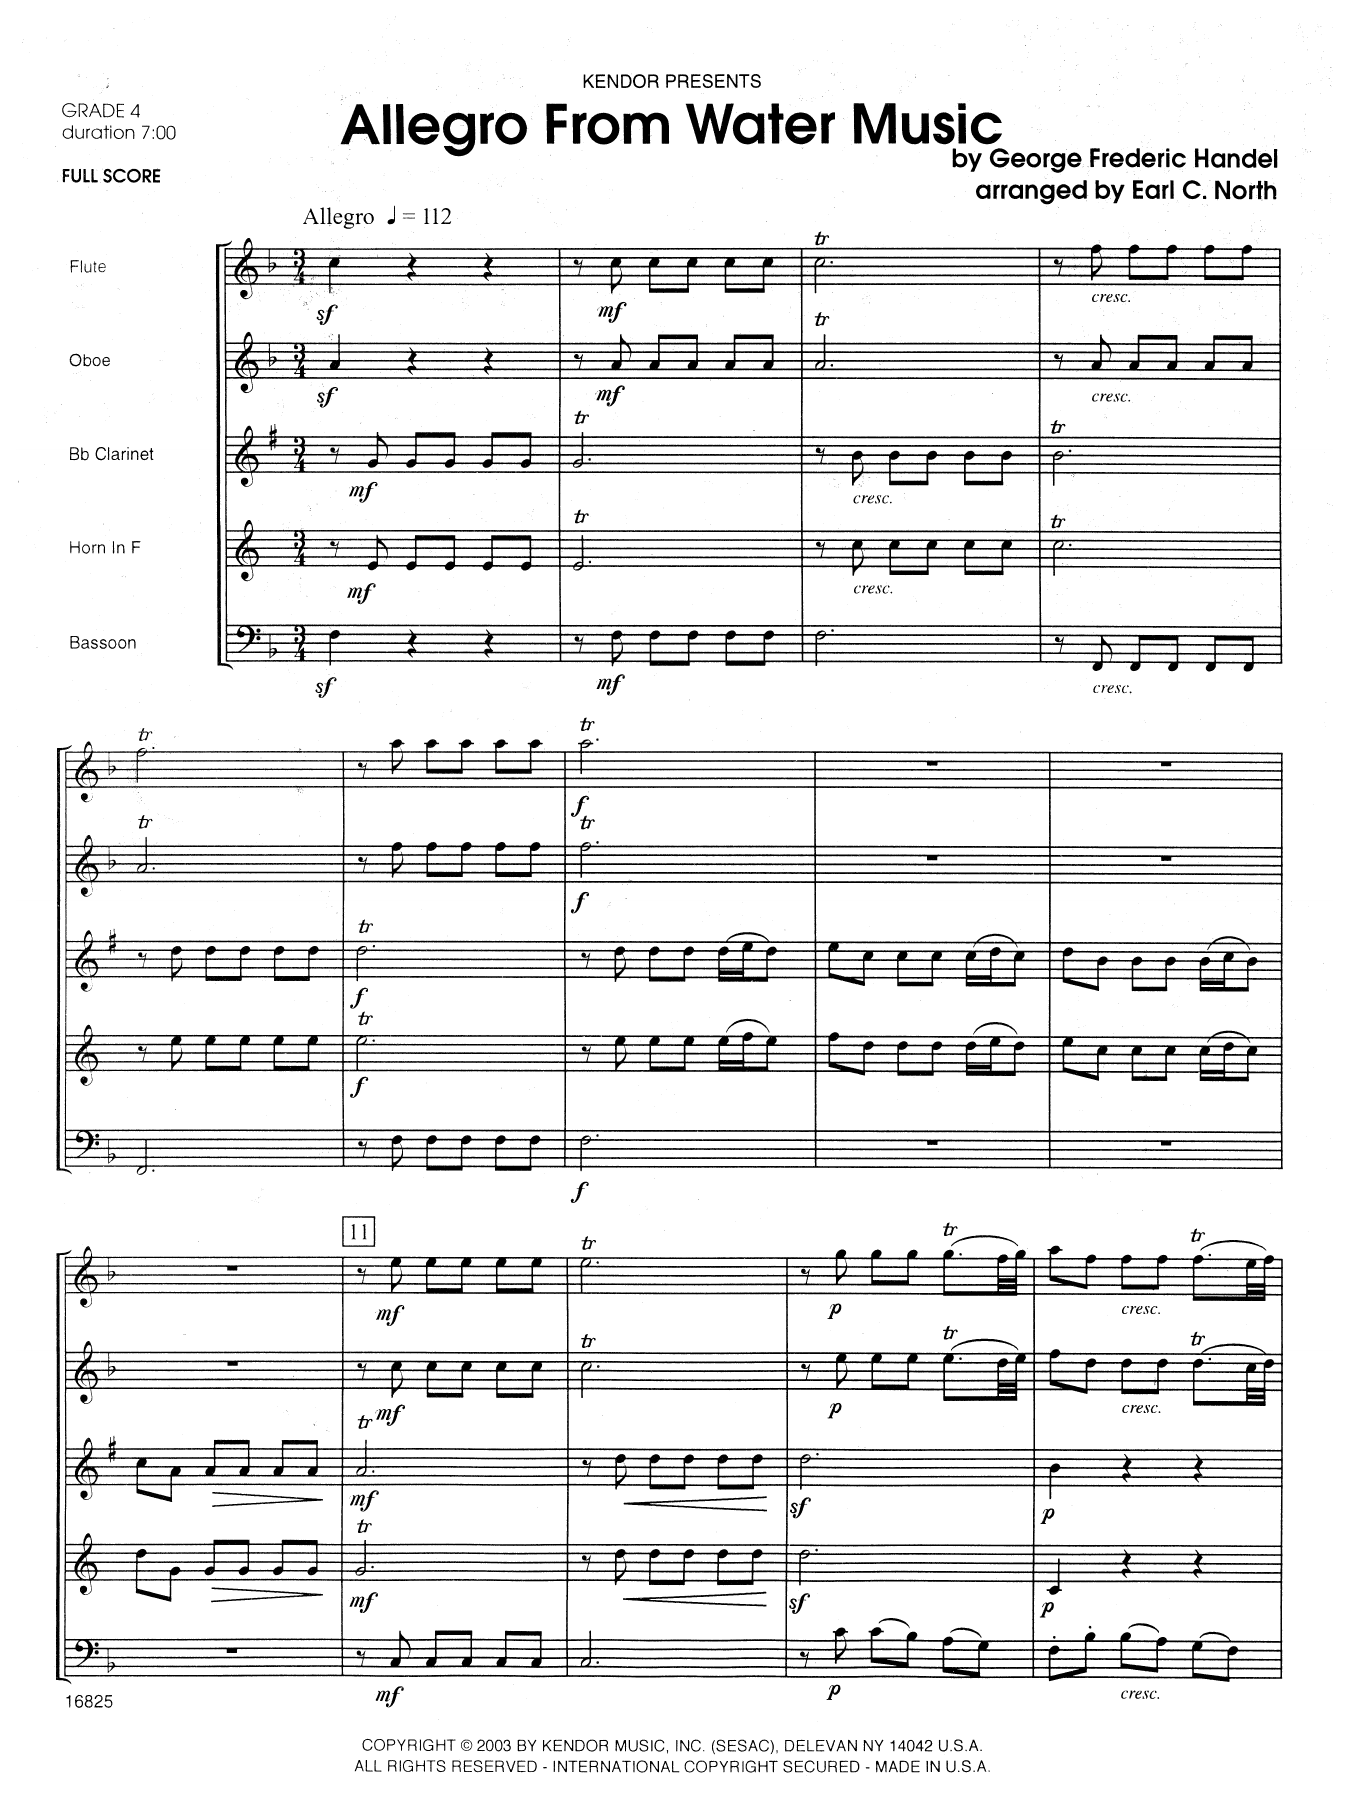 Download Earl North Allegro From Water Music - Full Score Sheet Music